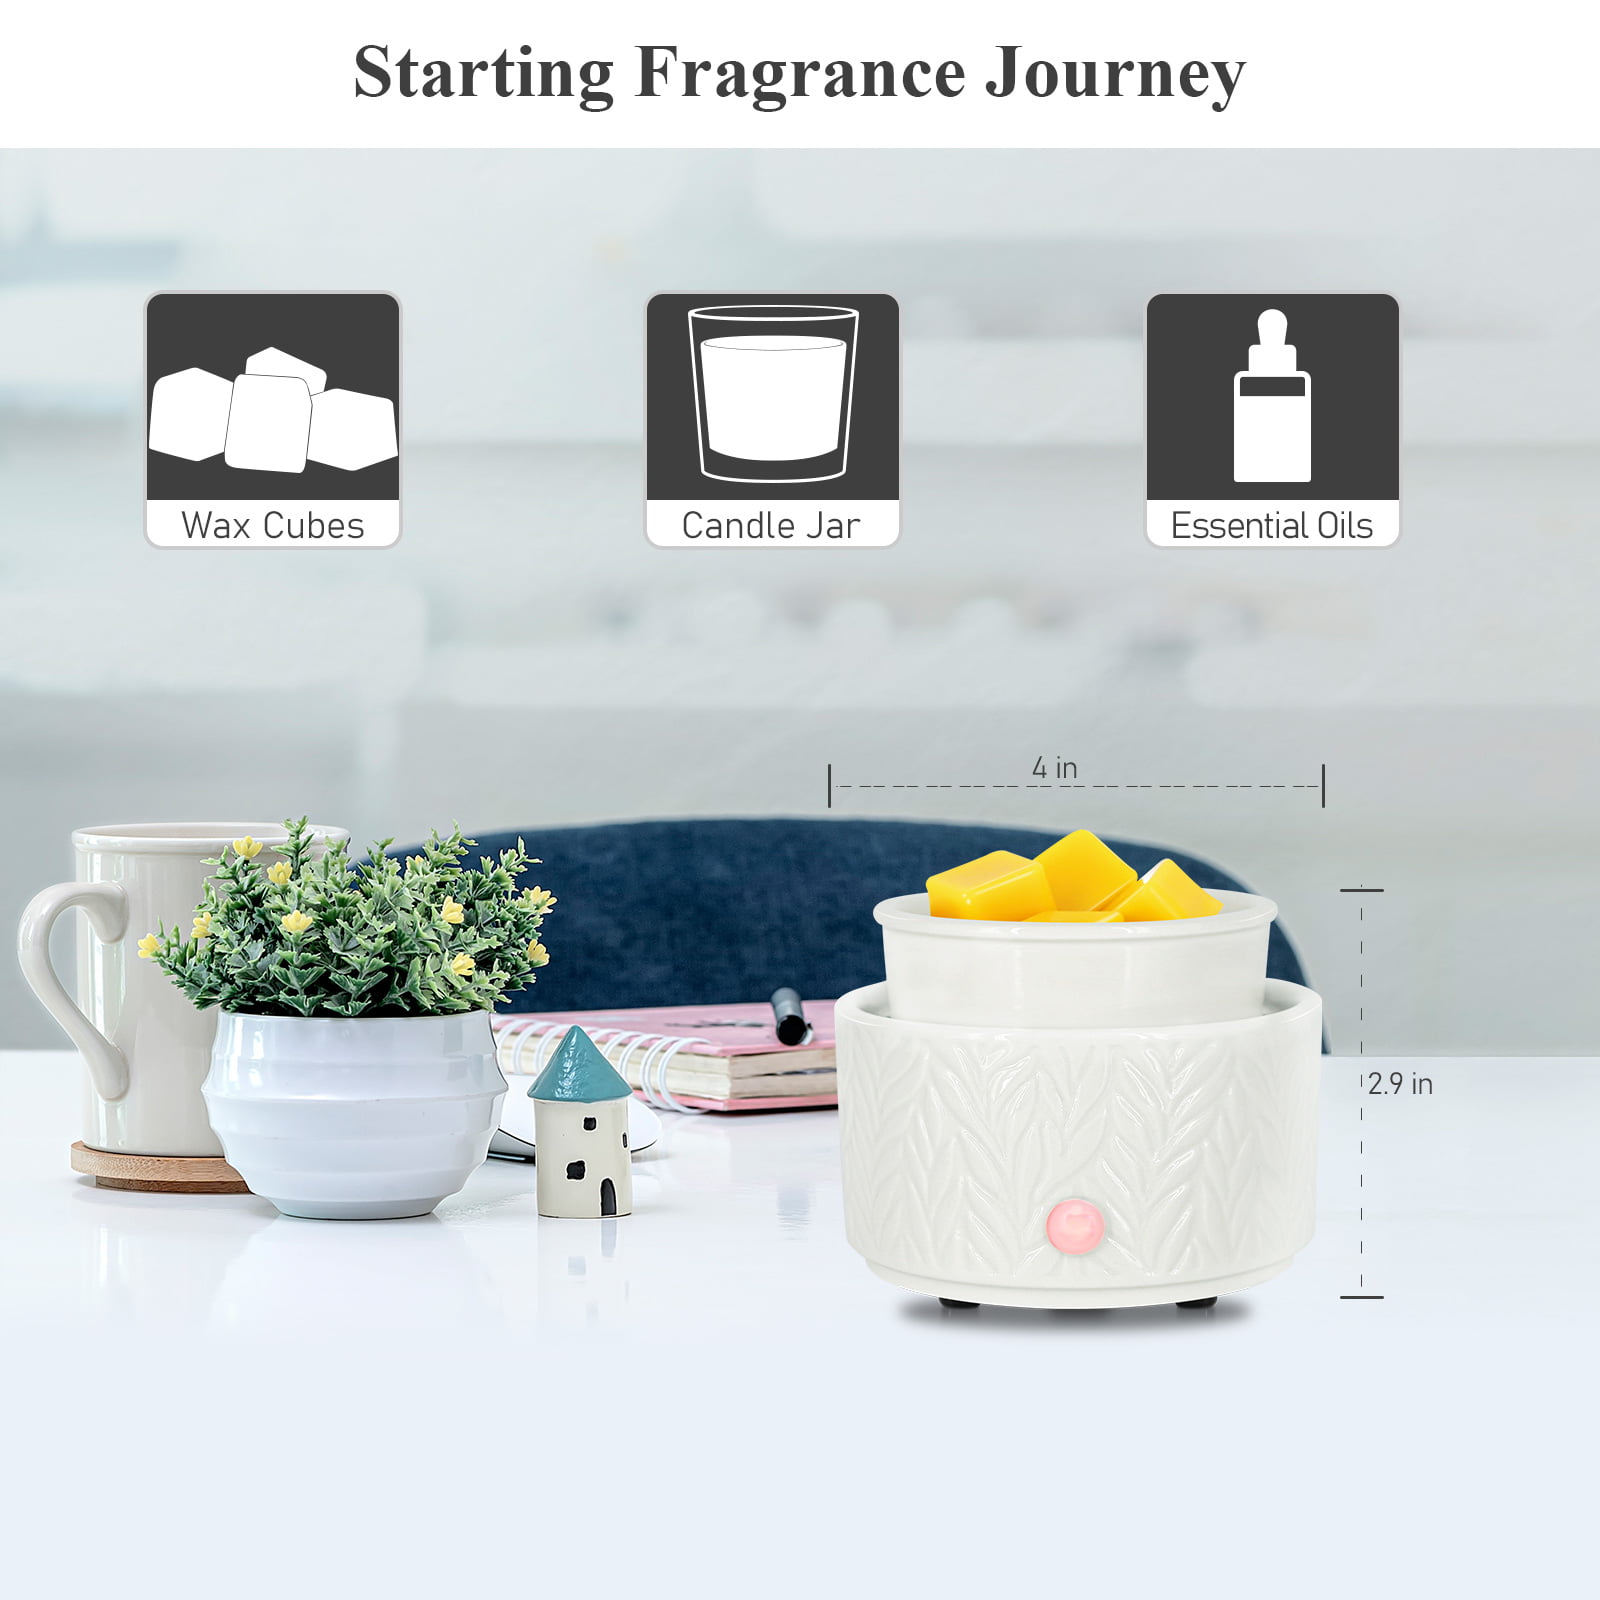 Wax Melt Warmer Ceramic 3- In- 1 Candle Wax Warmer Scented Melter Candle Fragrance Wax Burner for Home Office Bedroom Gift & Decor, White